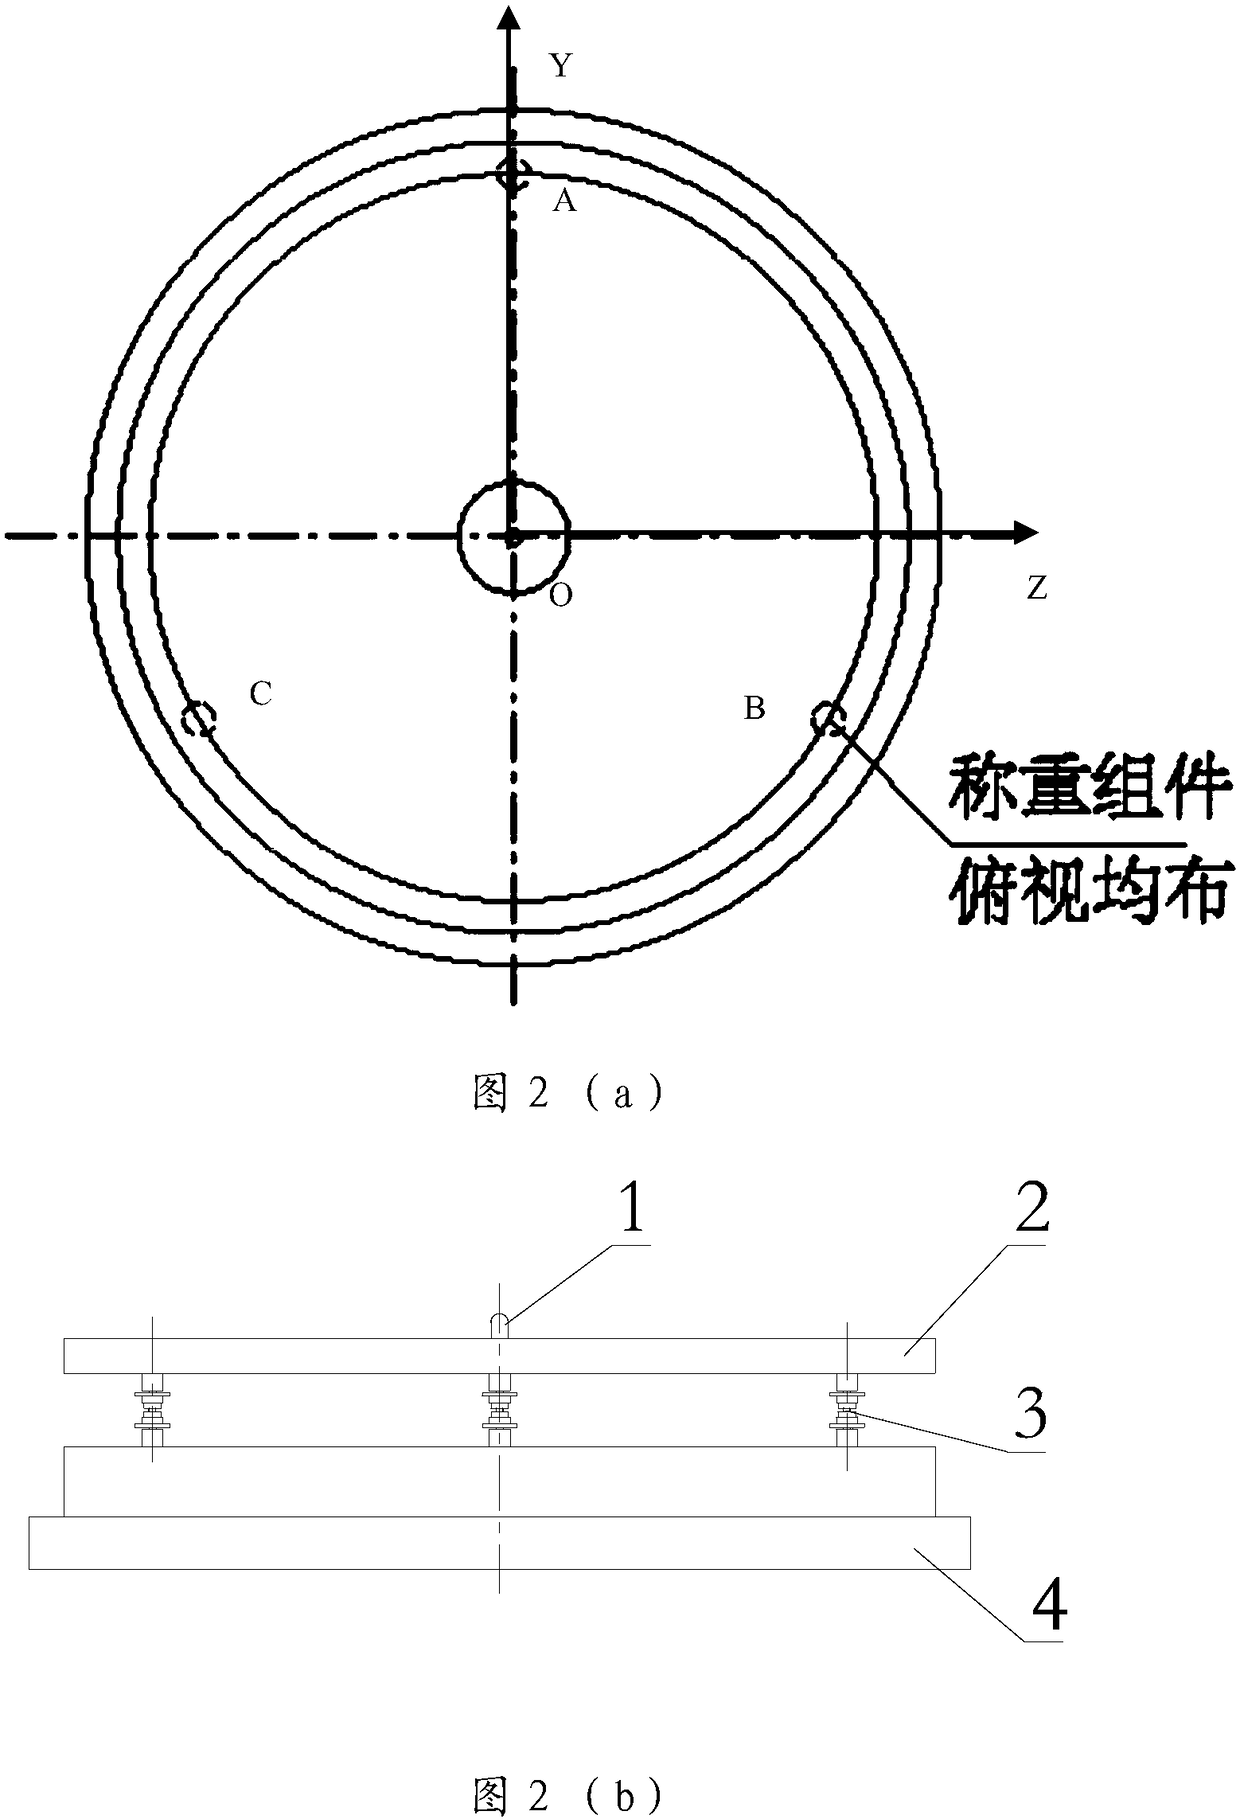 A kind of centroid three-point support redundant measurement equipment